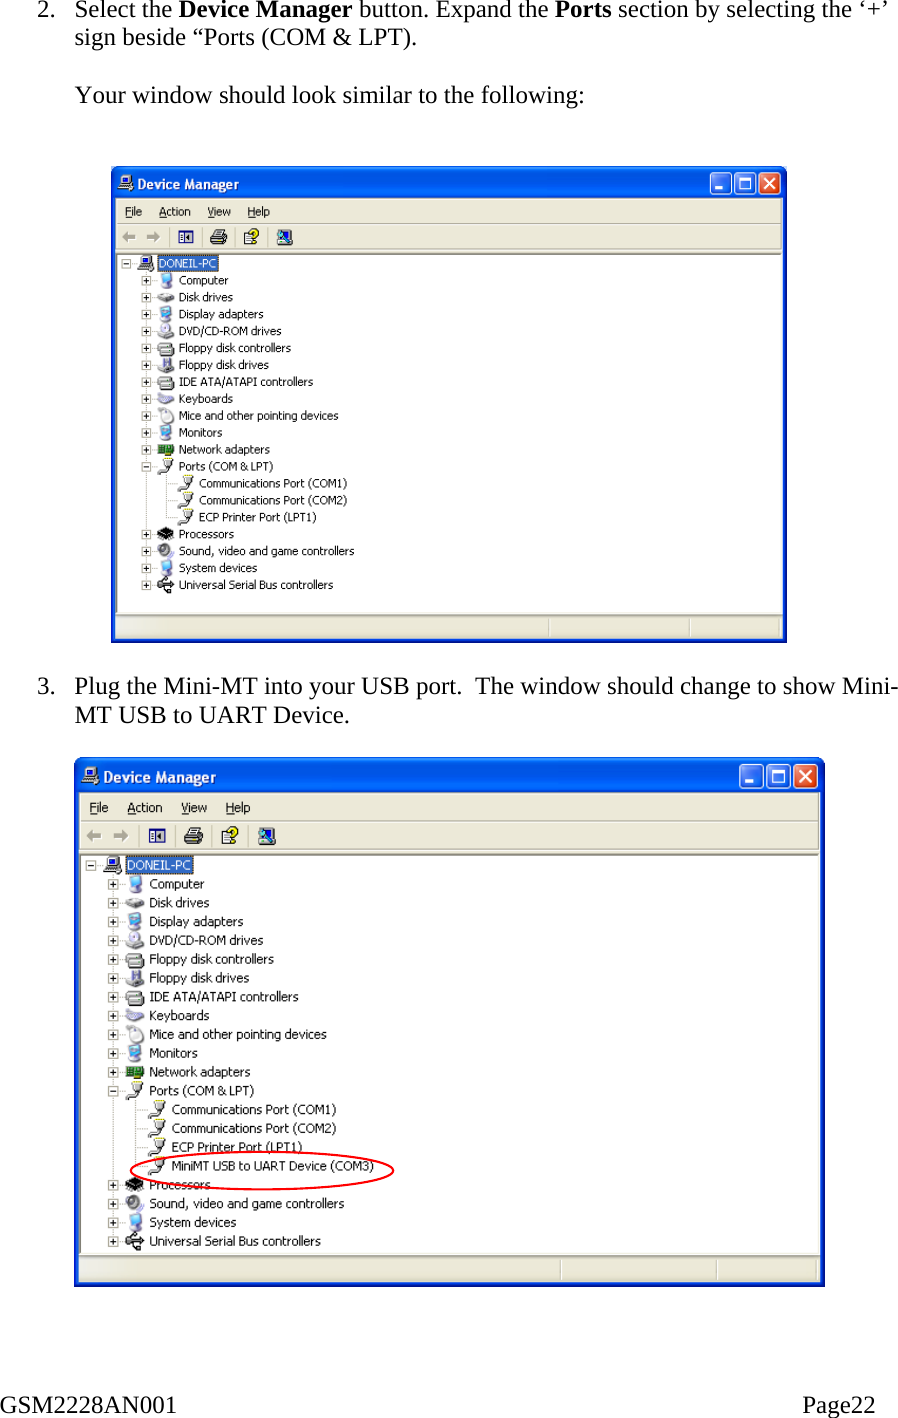  2. Select the Device Manager button. Expand the Ports section by selecting the ‘+’ sign beside “Ports (COM &amp; LPT).    Your window should look similar to the following:     3.  Plug the Mini-MT into your USB port.  The window should change to show Mini-MT USB to UART Device.    GSM2228AN001                                                                                                    Page22 